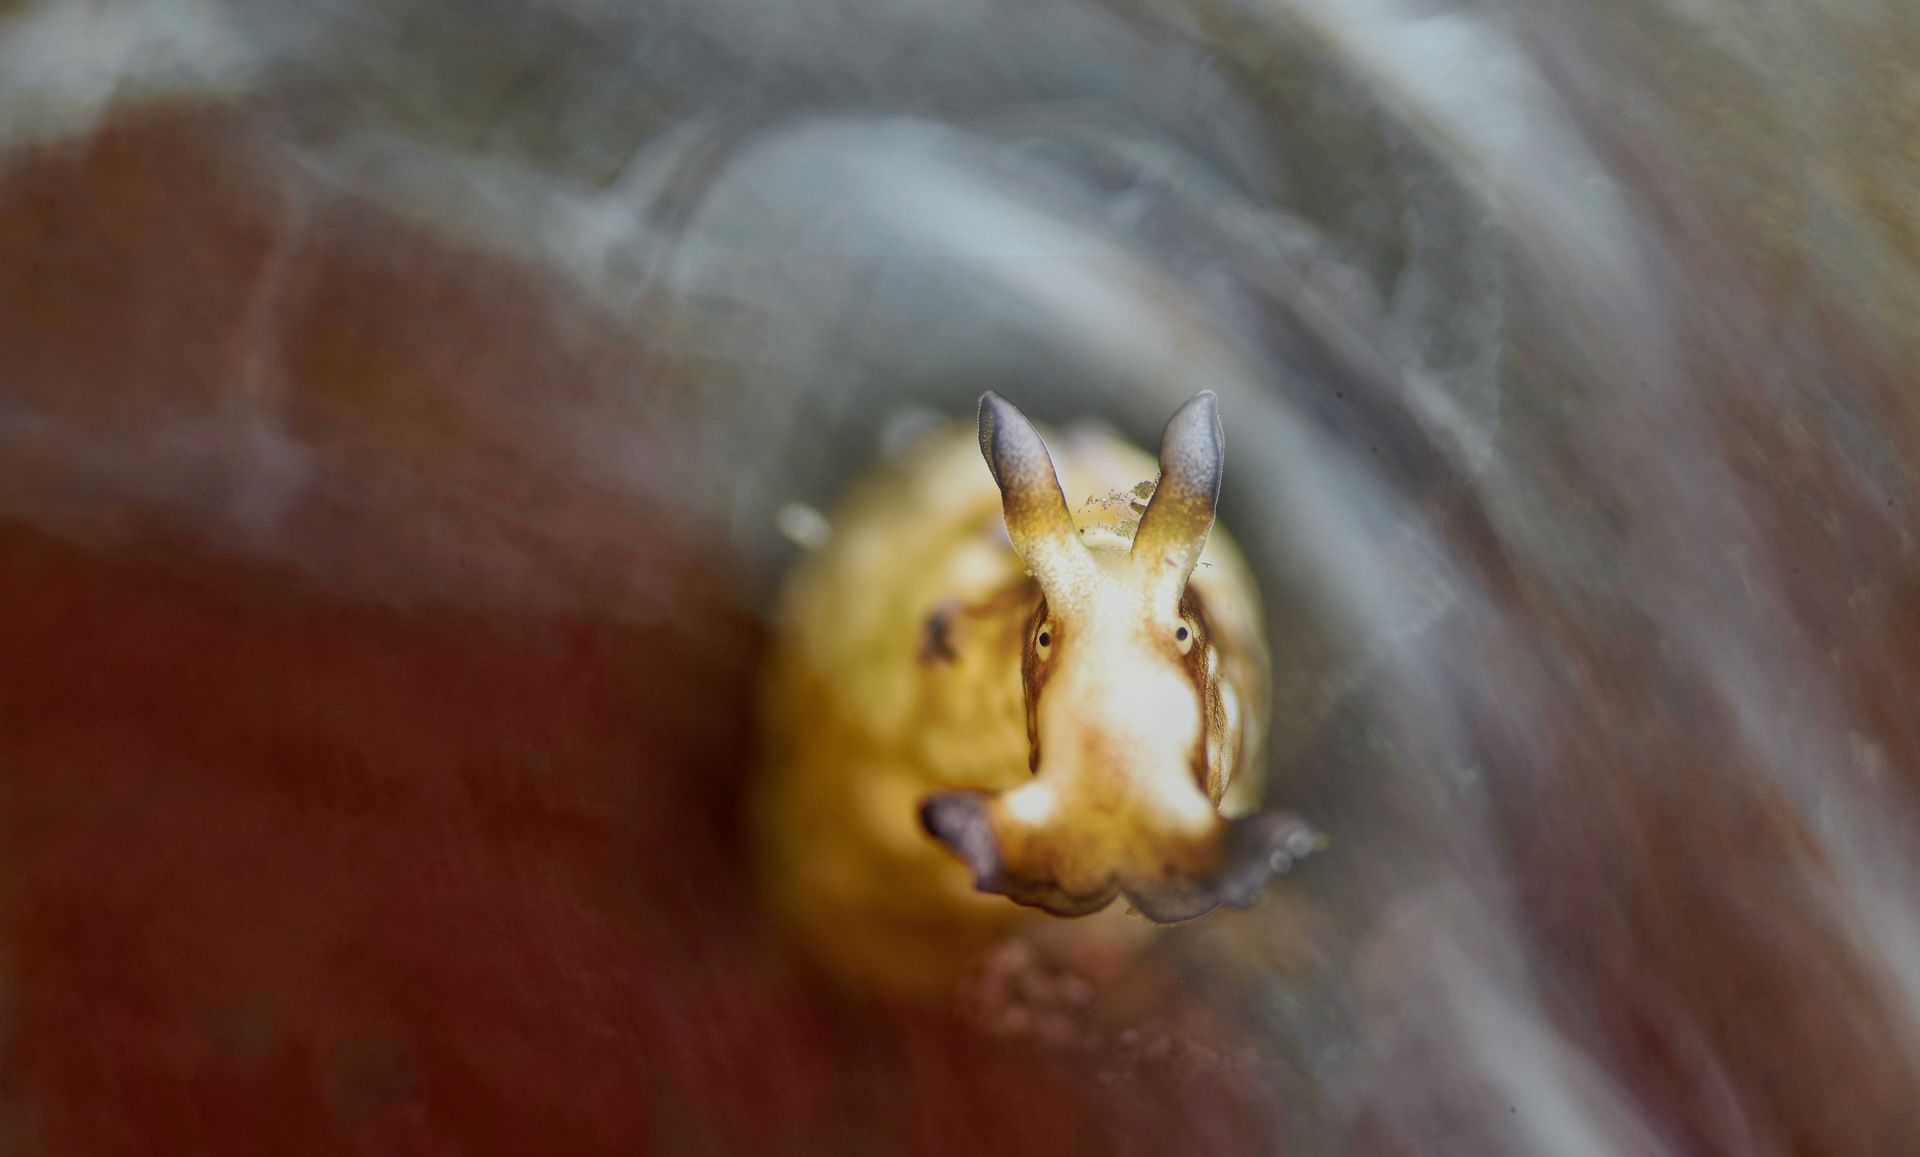 A sea hare faces the photographer with an unusual expression amid a swirl of white creating an artistic underwater macro image